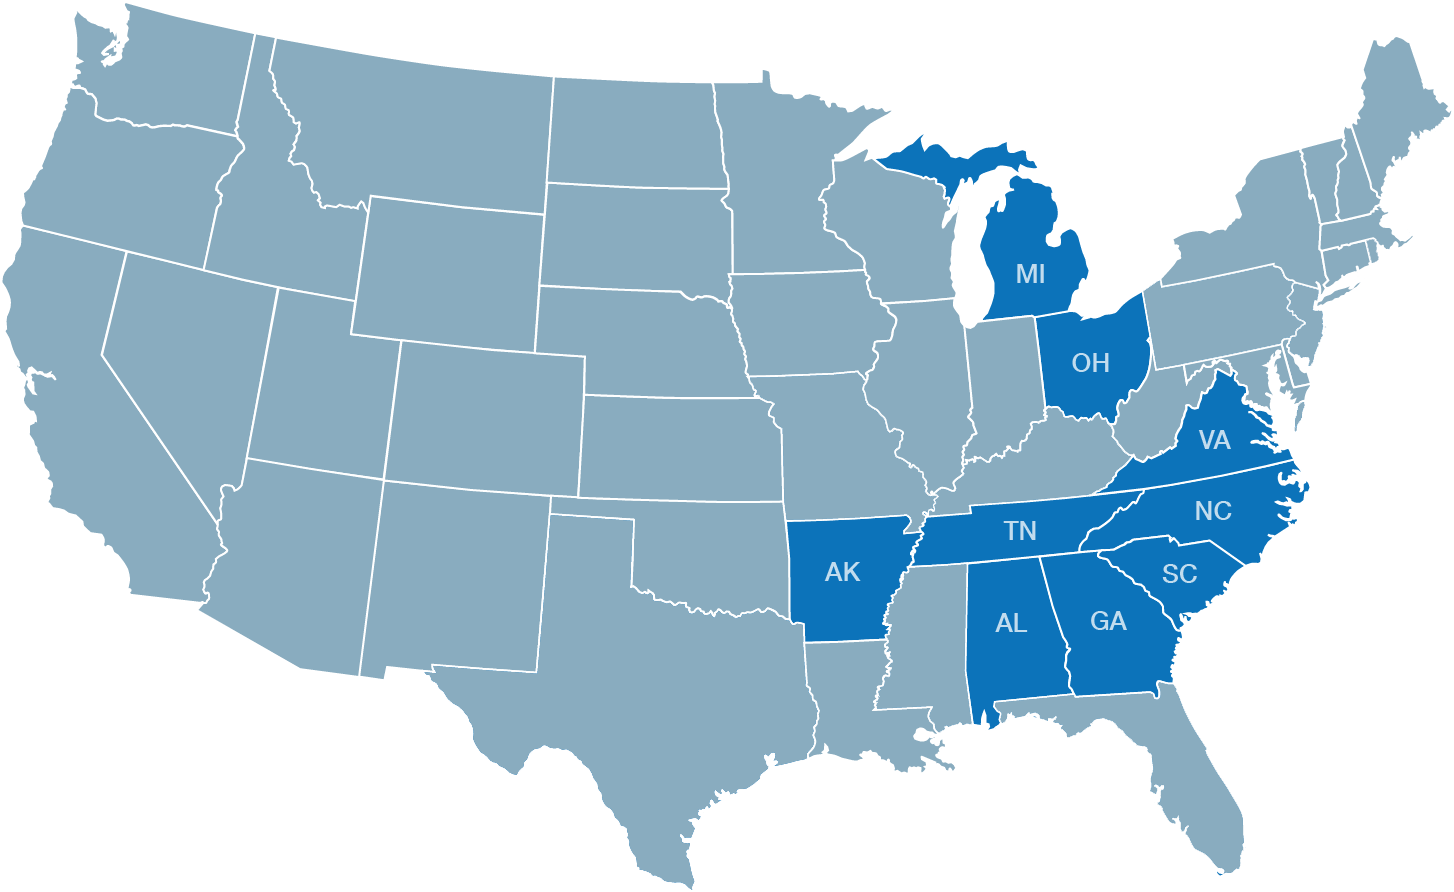 States We're Registered In